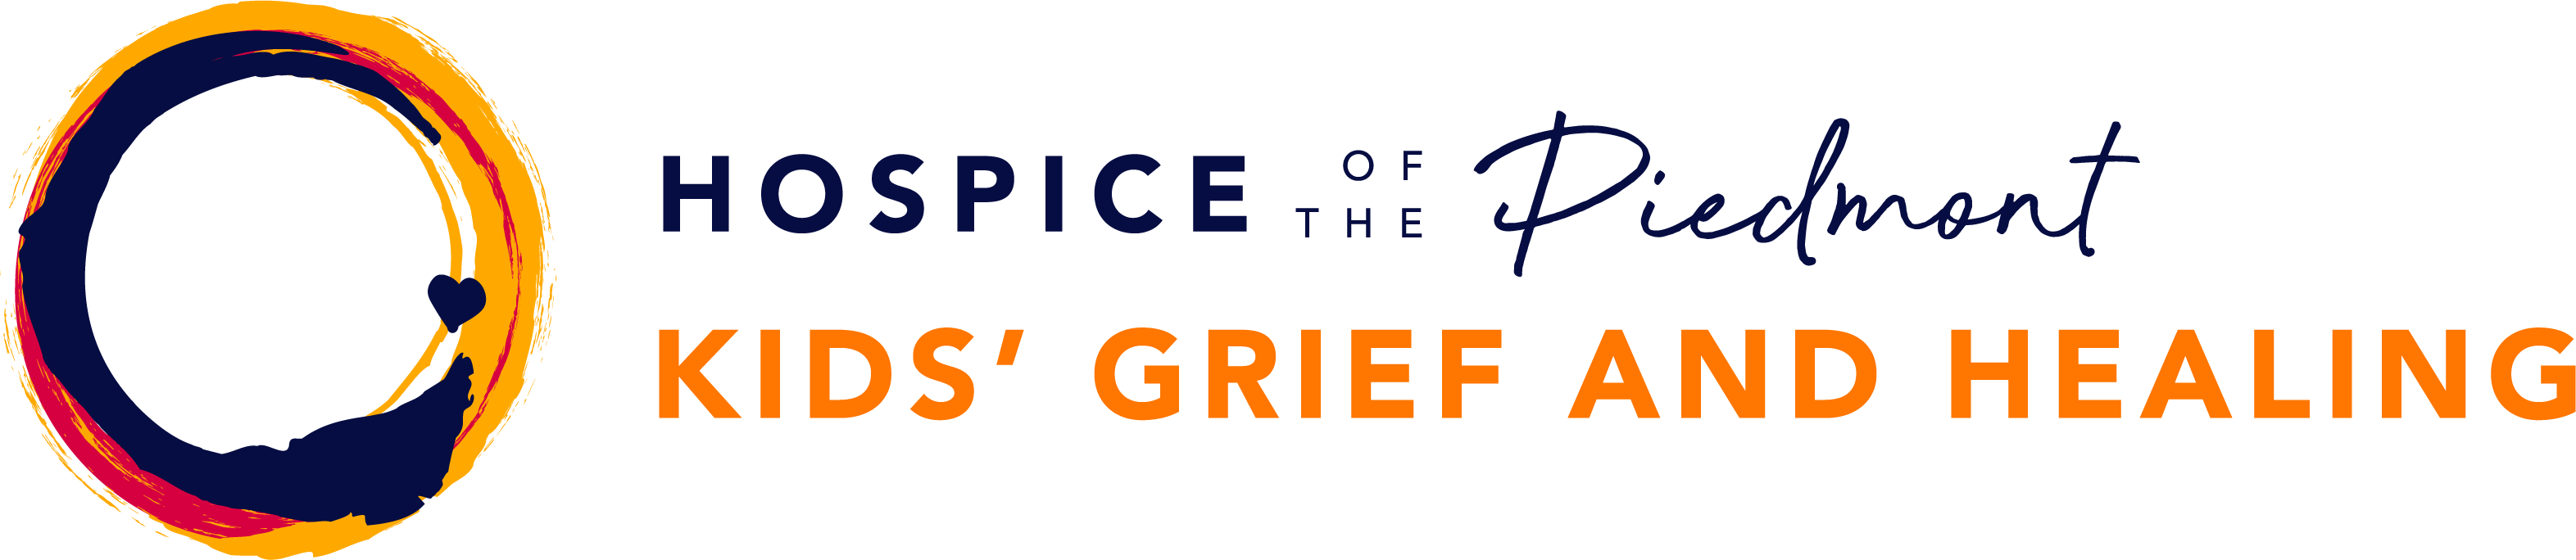 Hospice of the Piedmont kids' grief and healing logo